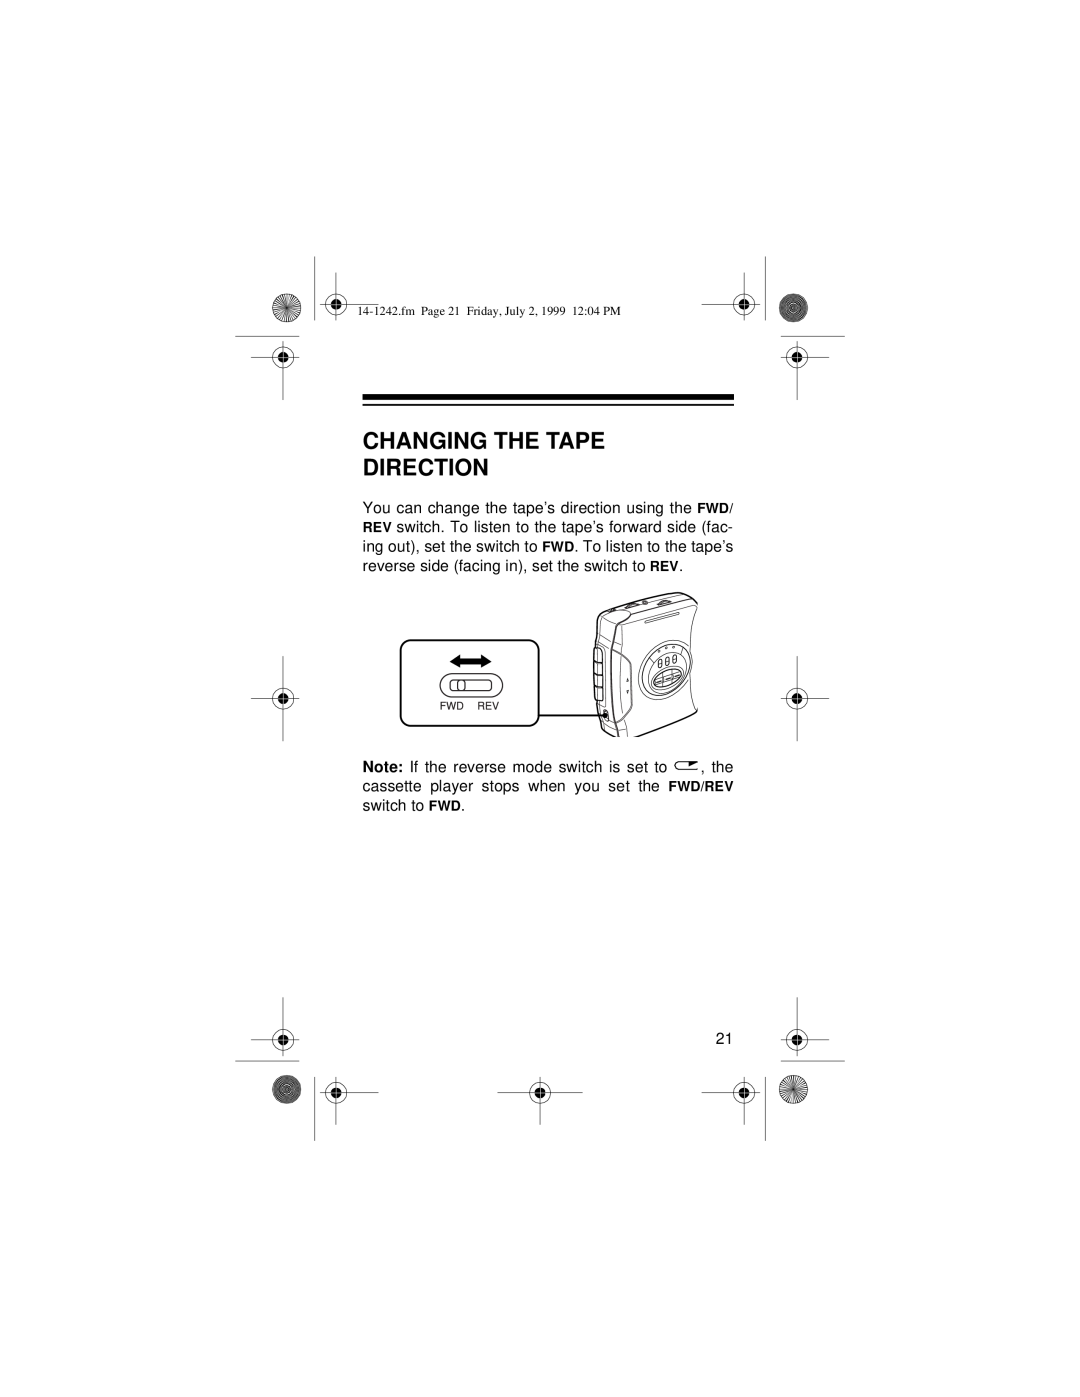 Optimus SCP-96 owner manual Changing The Tape Direction 